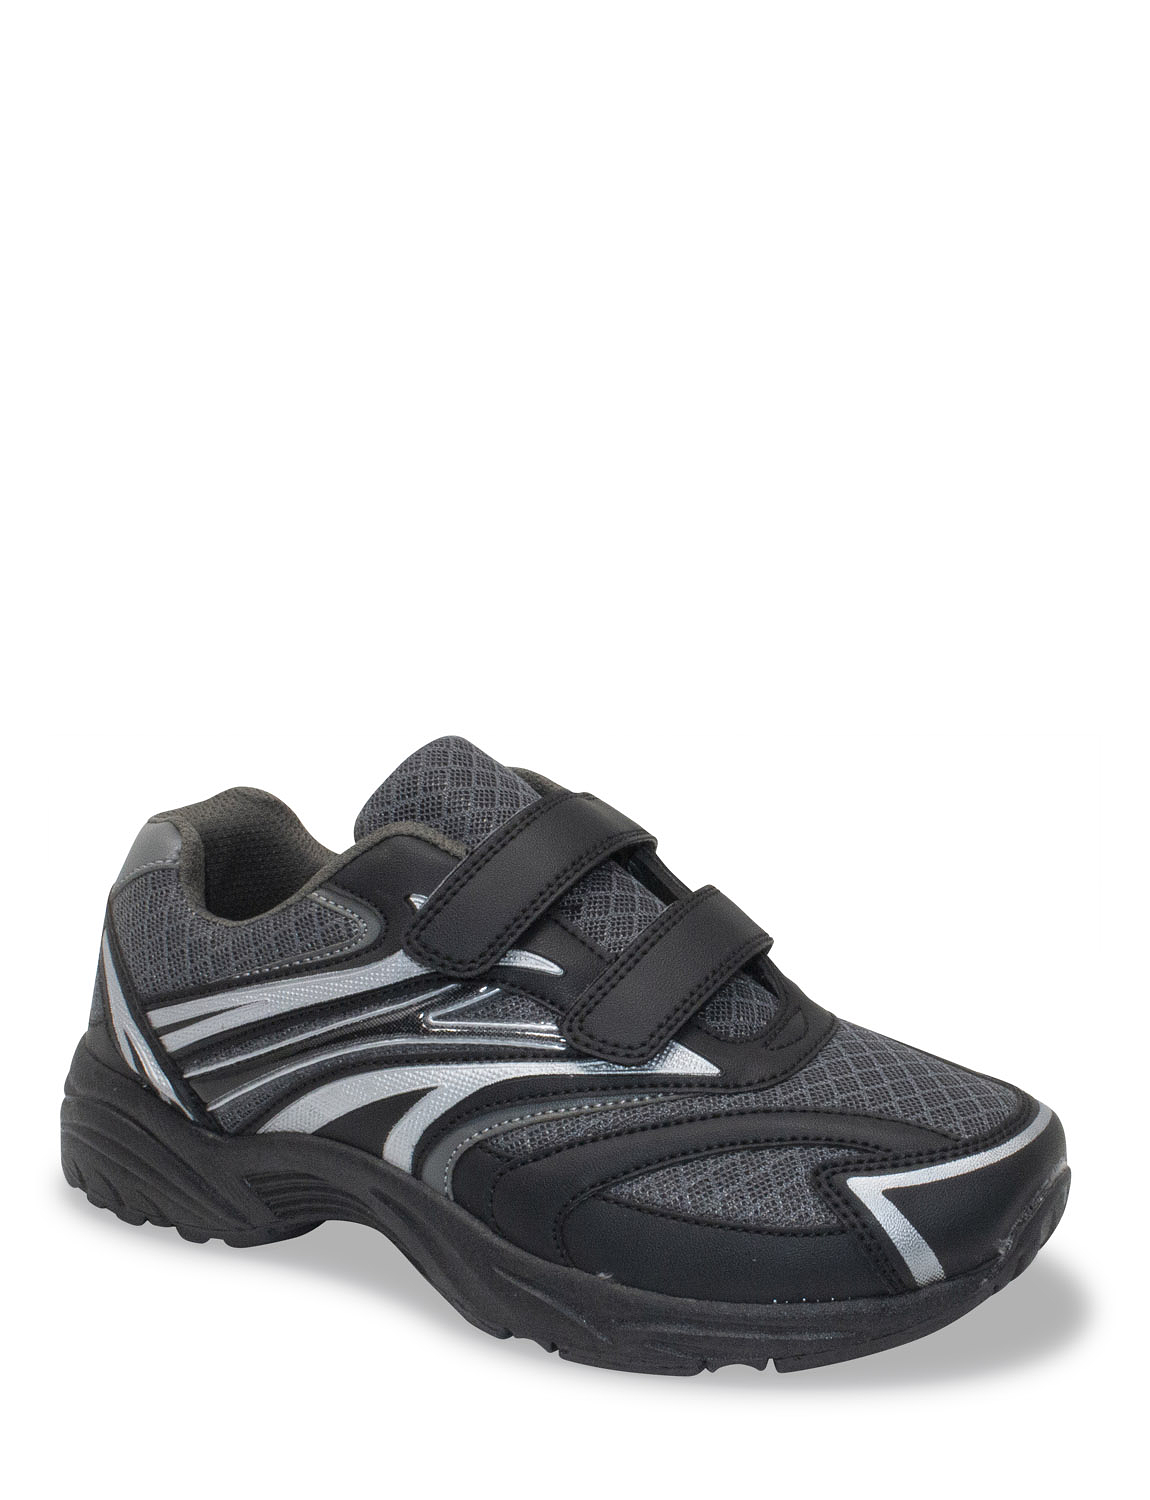 Ladies Wide Fit Touch Fastening Trainer | Chums